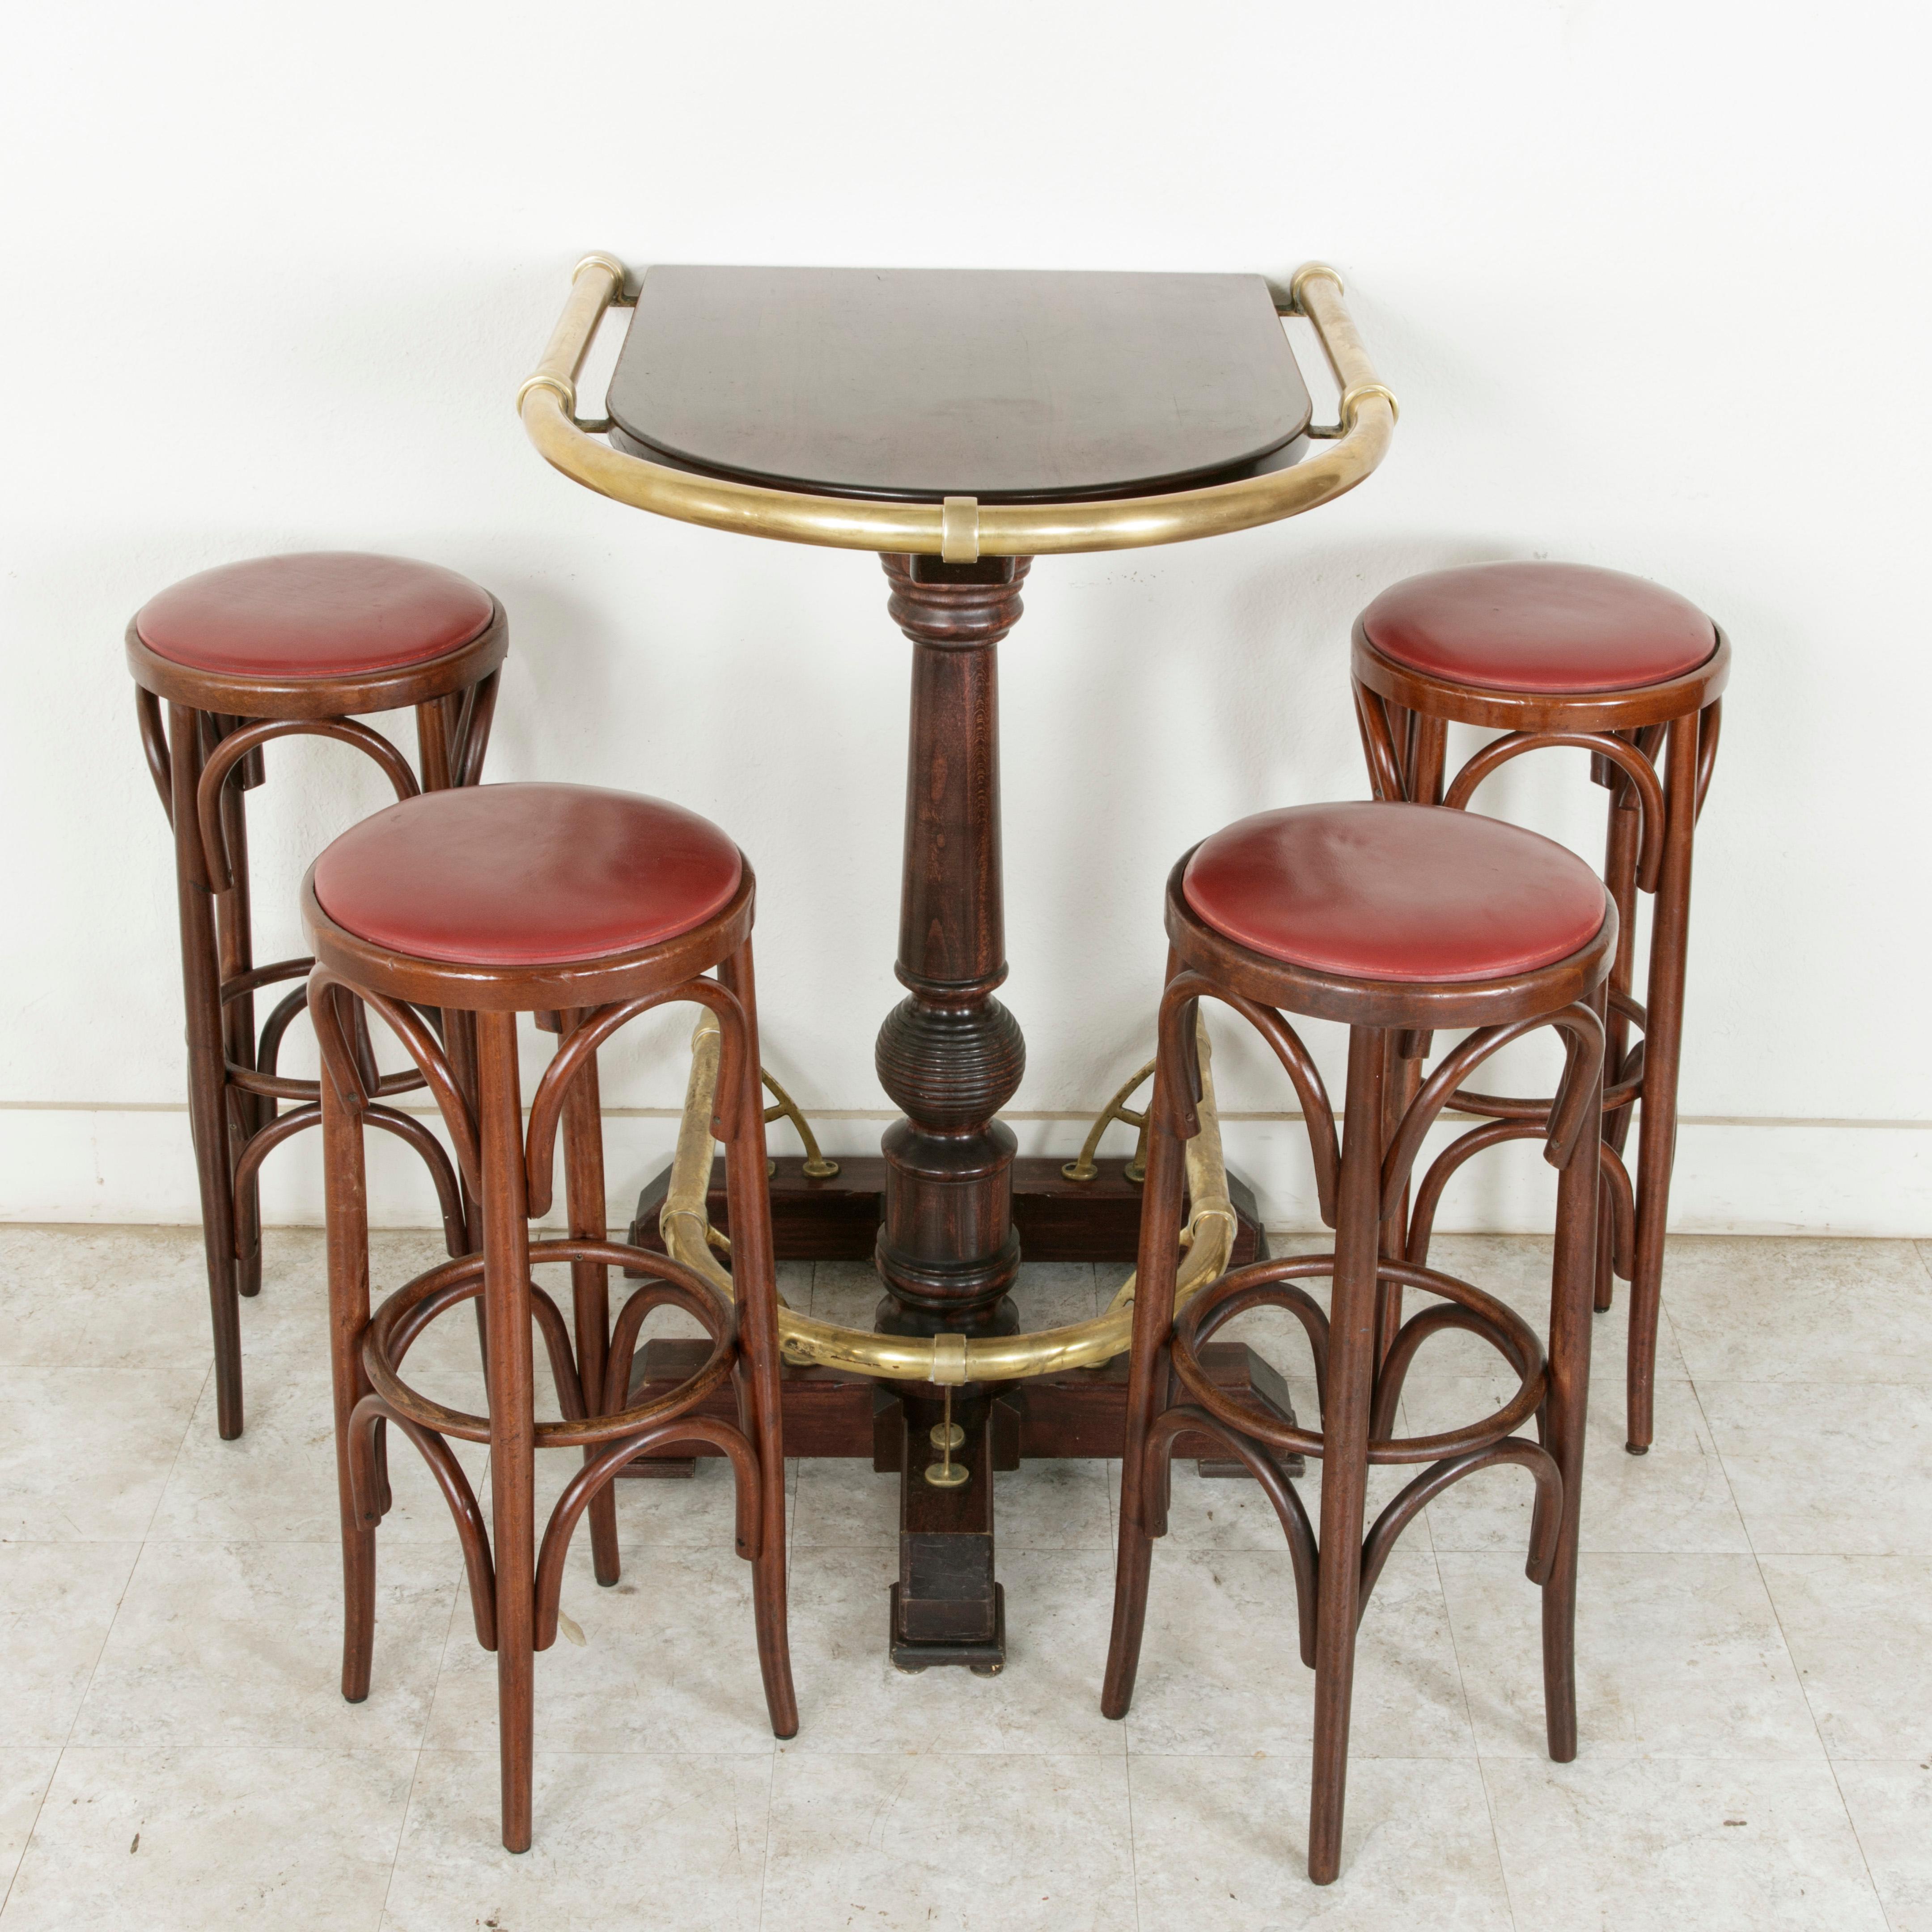 This 20th century French brasserie booth, complete with a high top table and four bar stools, once served in a Parisian brasserie. The table originally stood against a wall and features a central turned pillar on a stretcher base and large brass